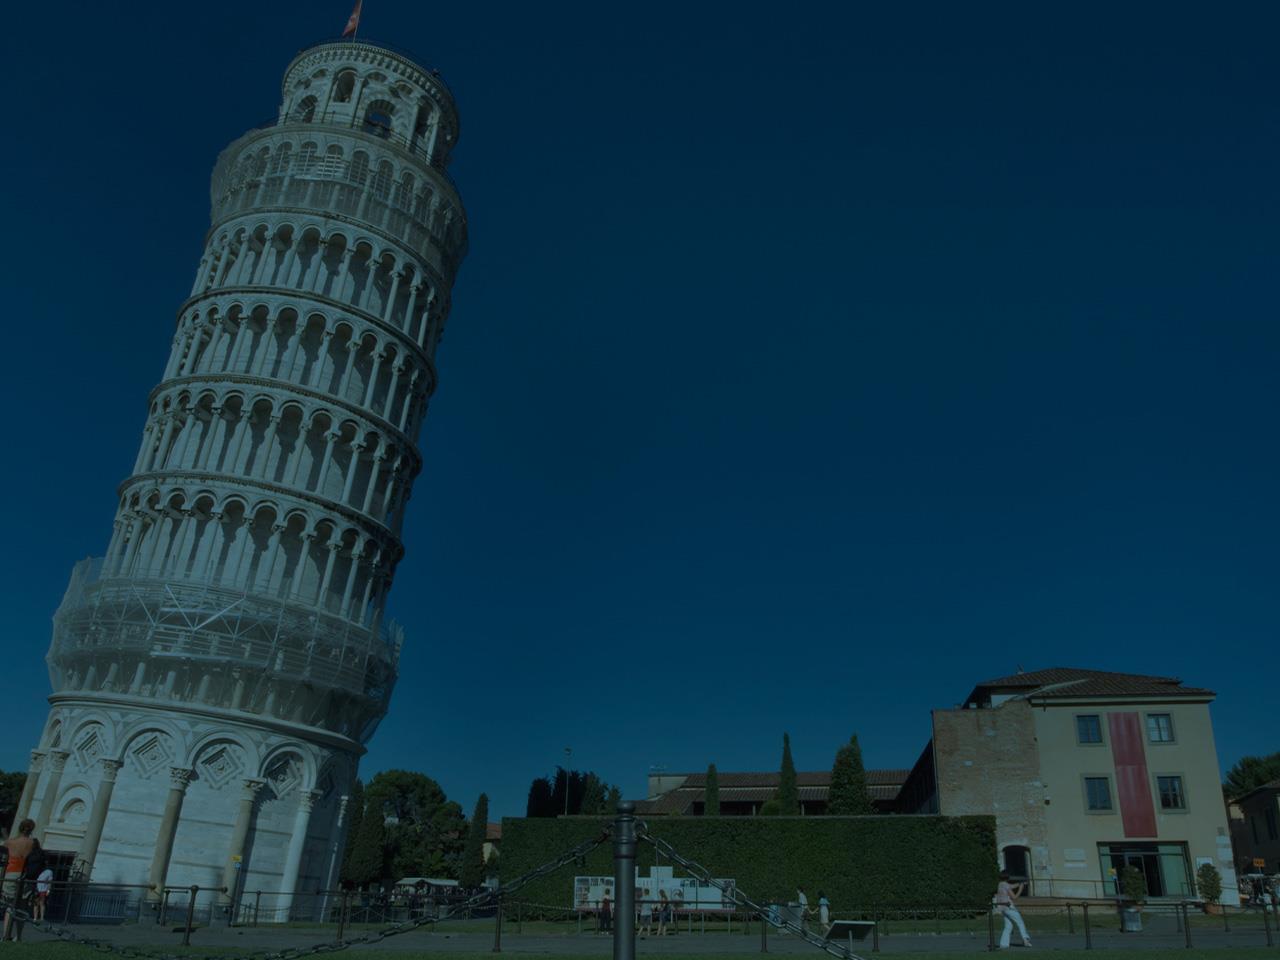 leaning tower of pizza leaning tower of pisa actual name